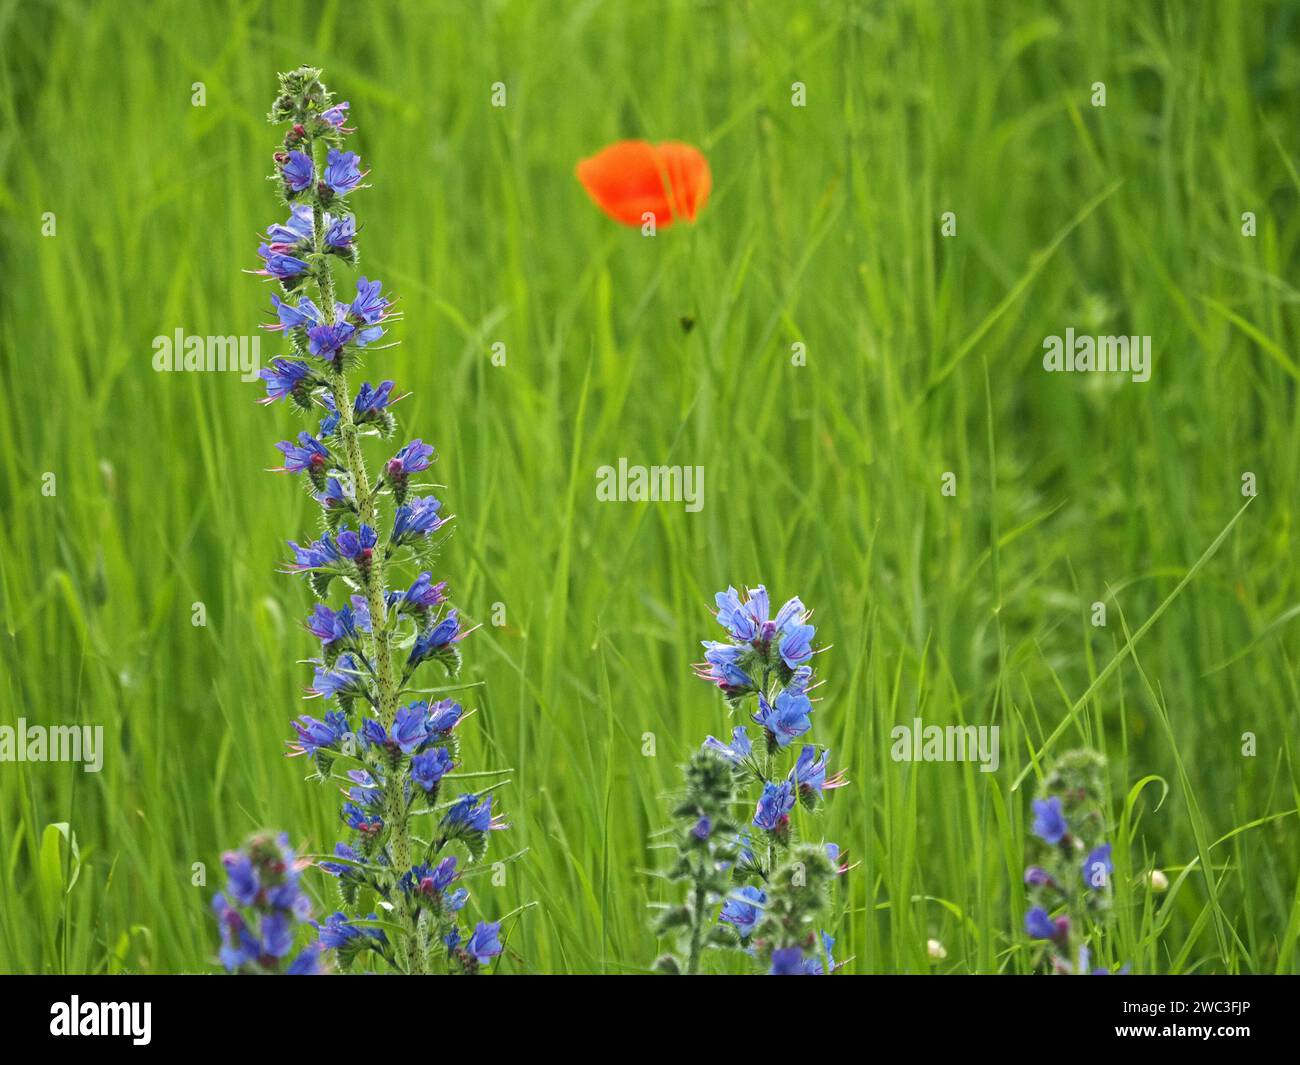 Viper's Bugloss (Echium vulgare) growing in wildflower meadow with defocussed Common poppy (Papaver rhoeas) in background - Italian Alps, Italy,Europe Stock Photo